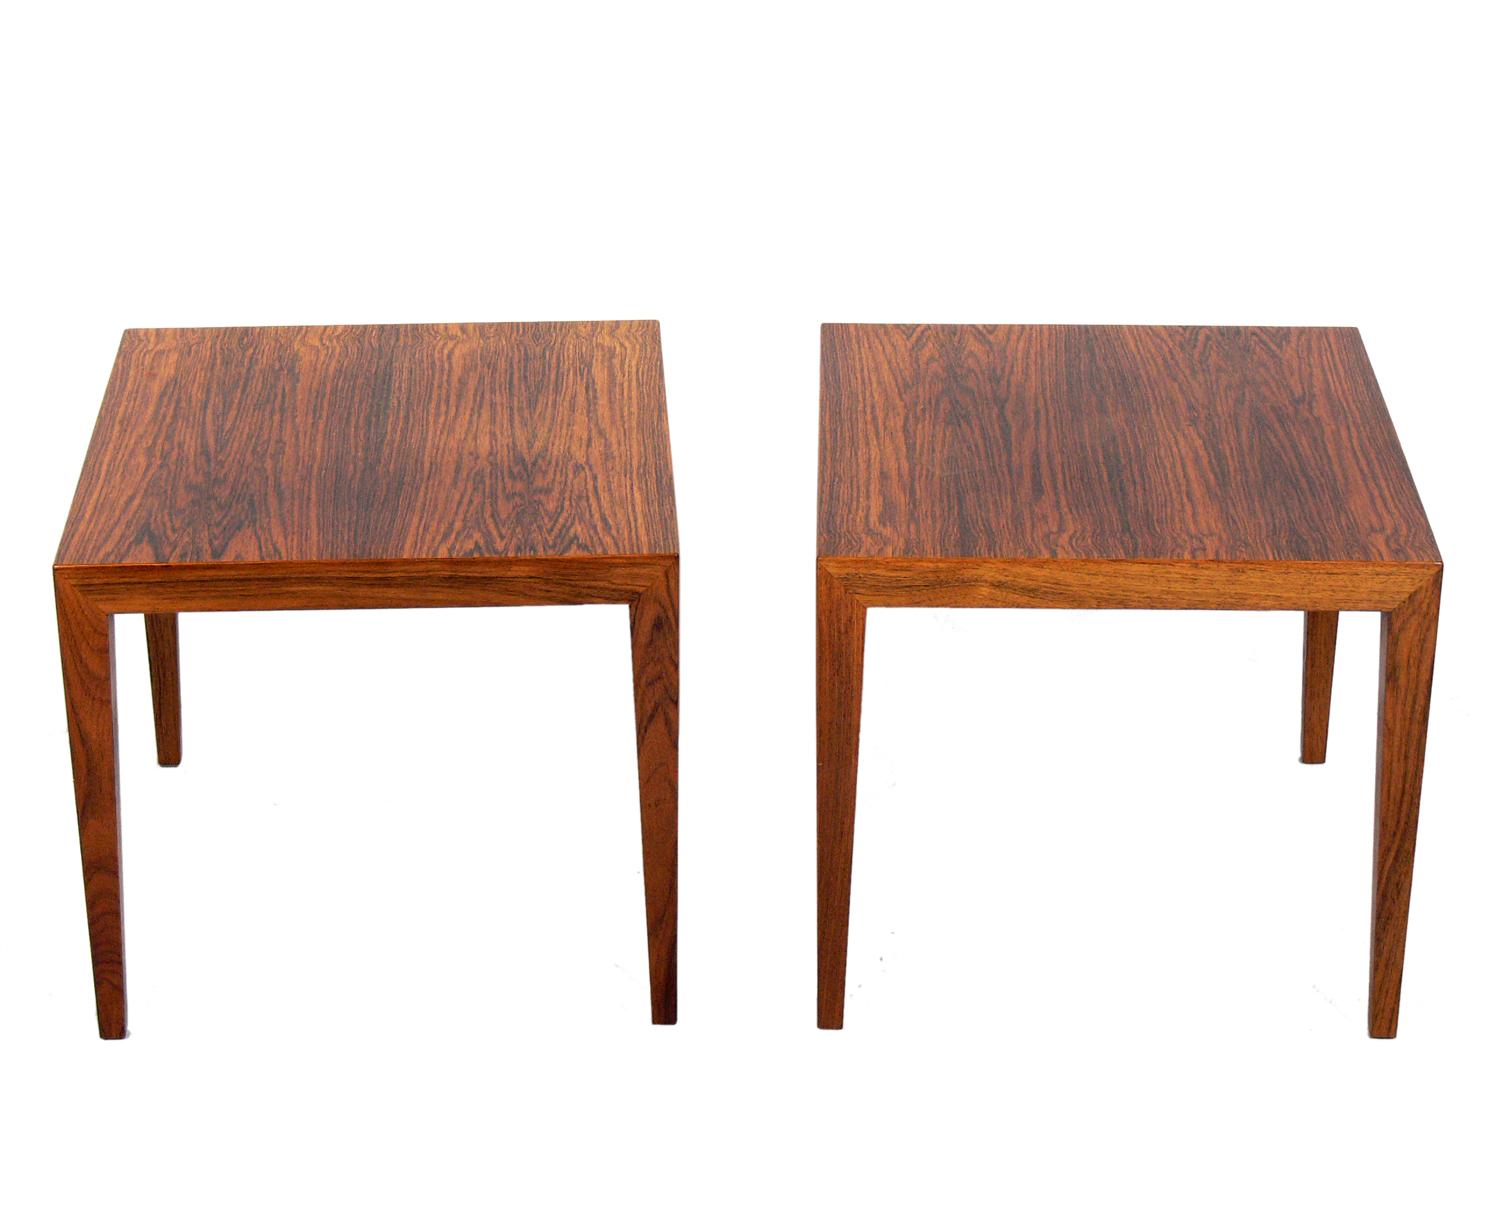 Pair of Danish Modern Rosewood End Tables, designed by Severin Hansen, Denmark, circa 1960s. Clean lined architectural design. They are a versatile size and can be used as end or side tables, or as night stands. These tables are currently being